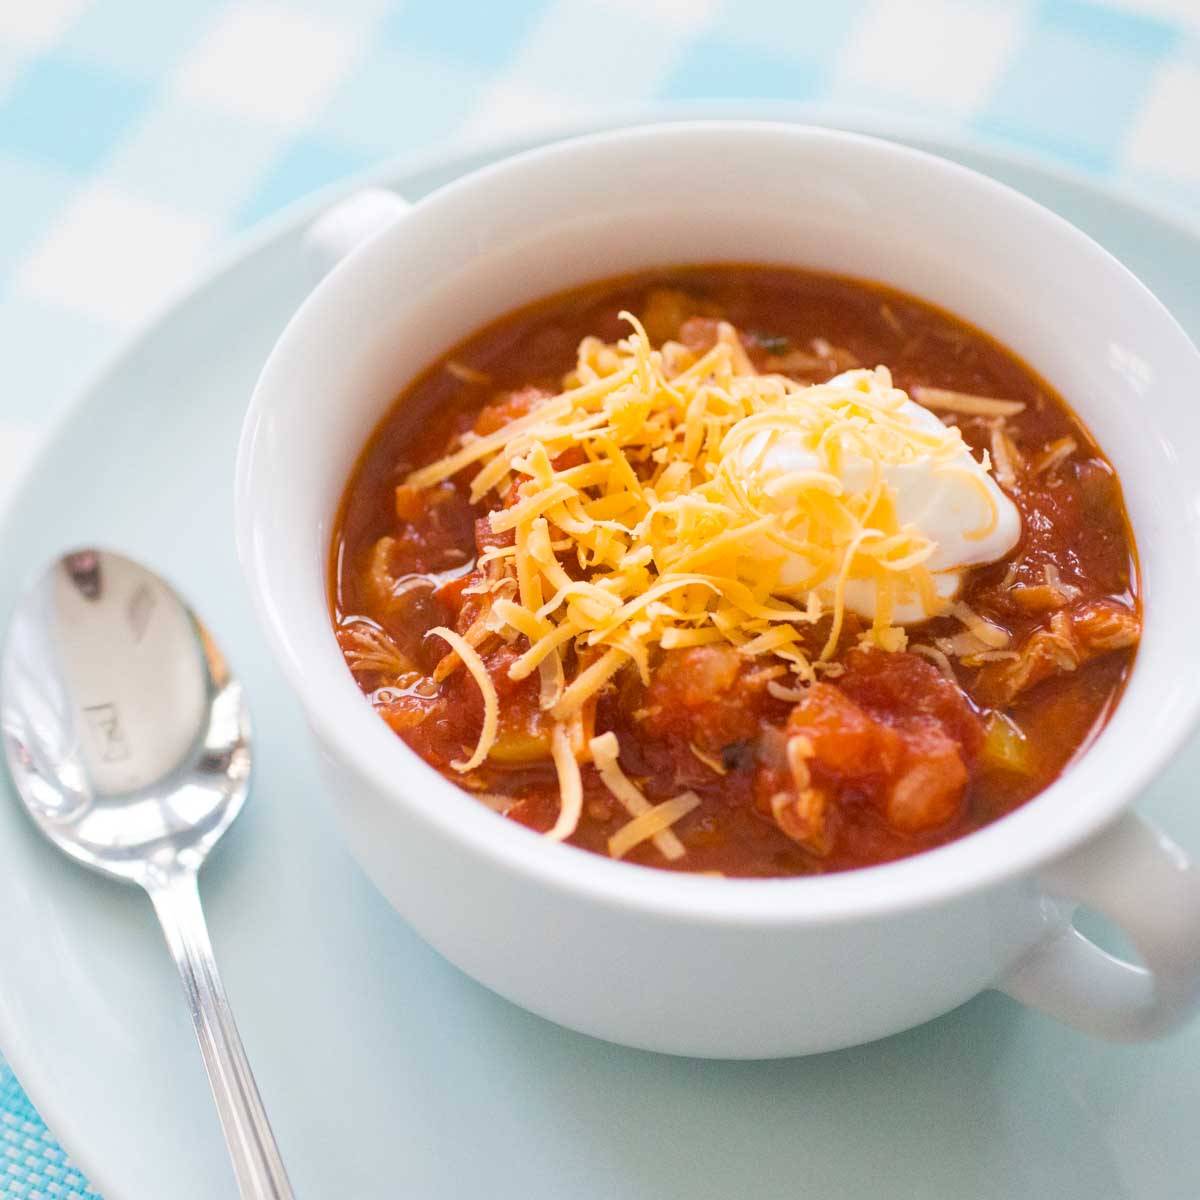 A white bowl of tomato-based chicken chili has shredded cheddar and a dollop of sour cream on top.